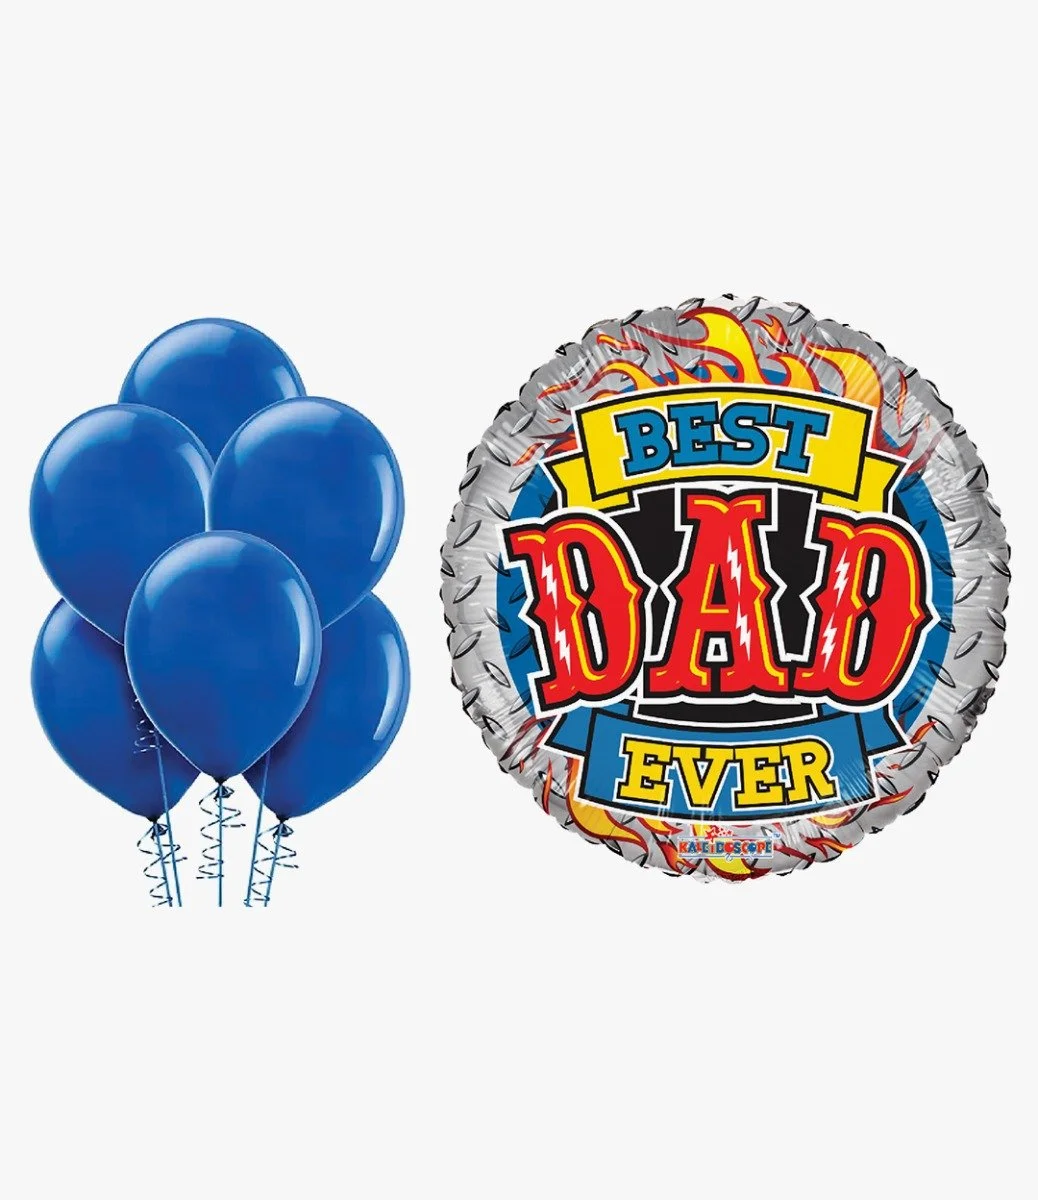 You are the Best Dad Balloon Set